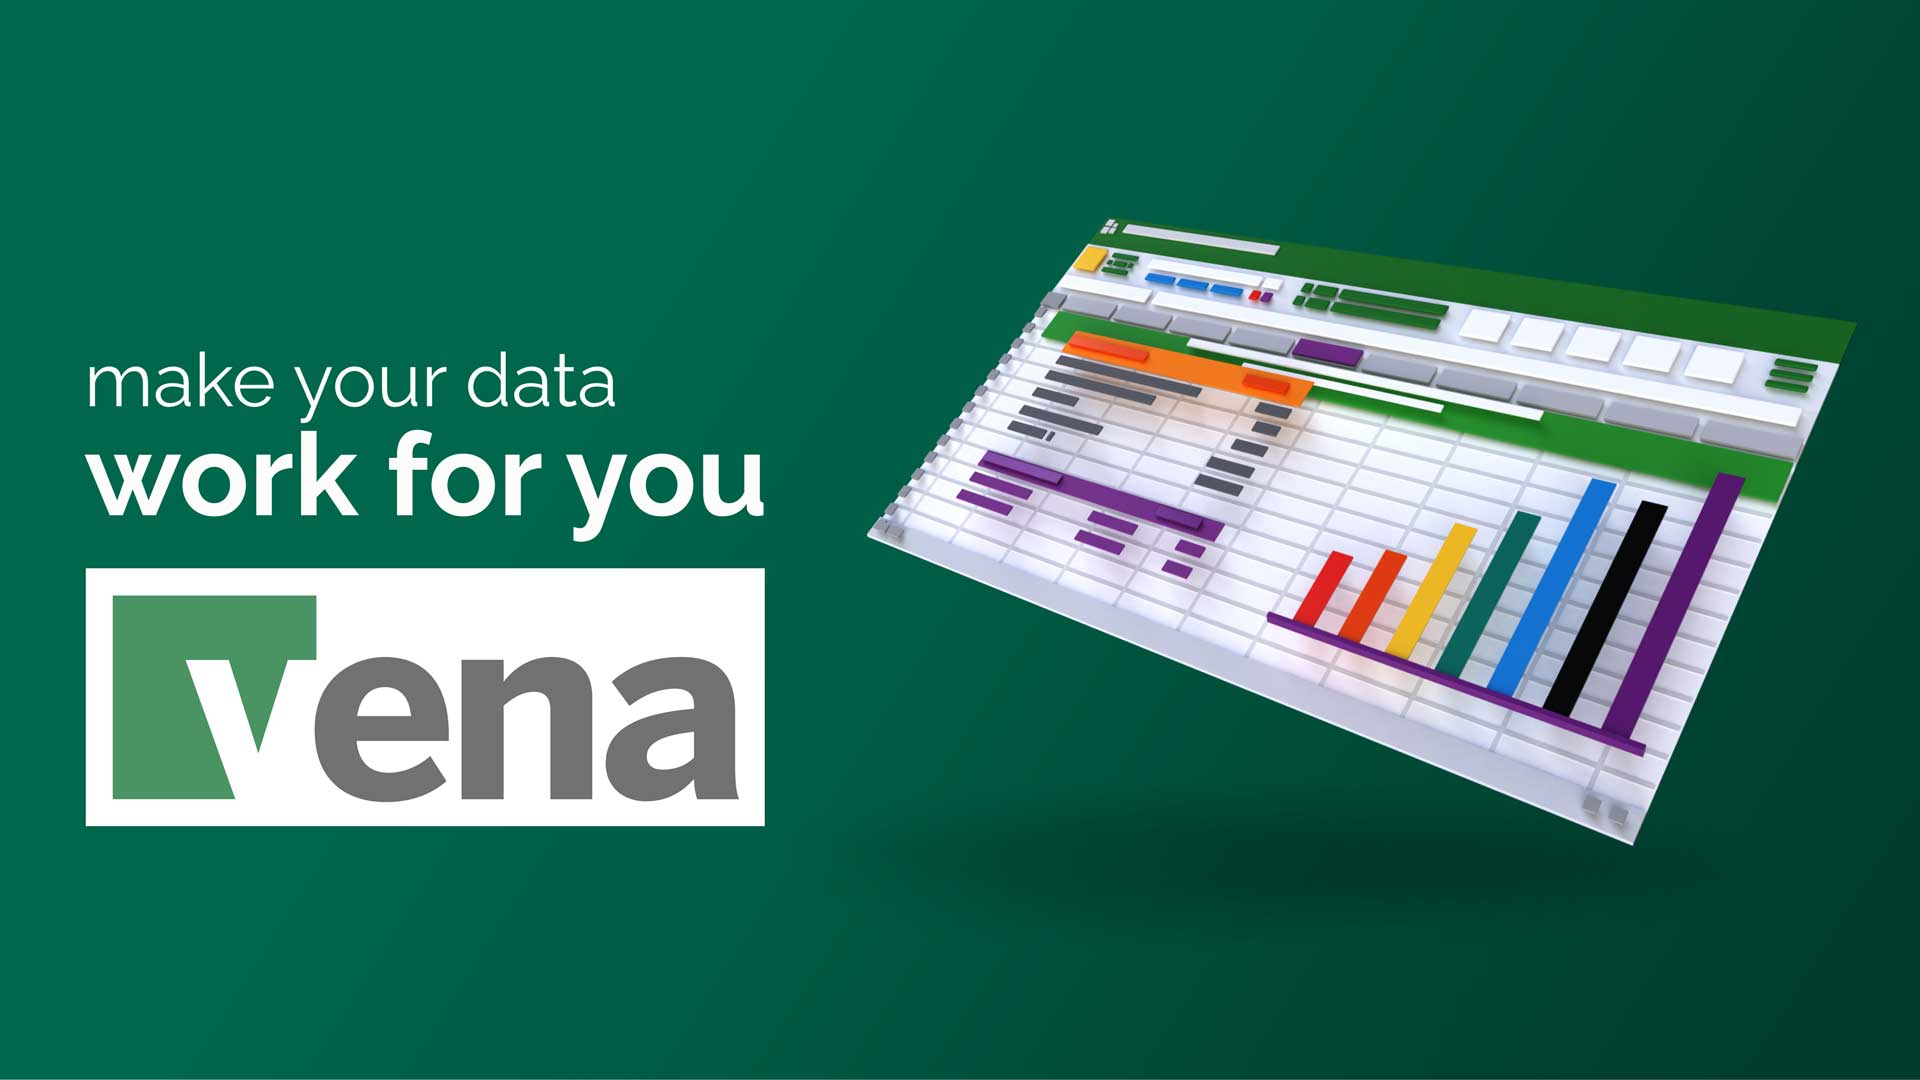 Make your data work for you with Vena.